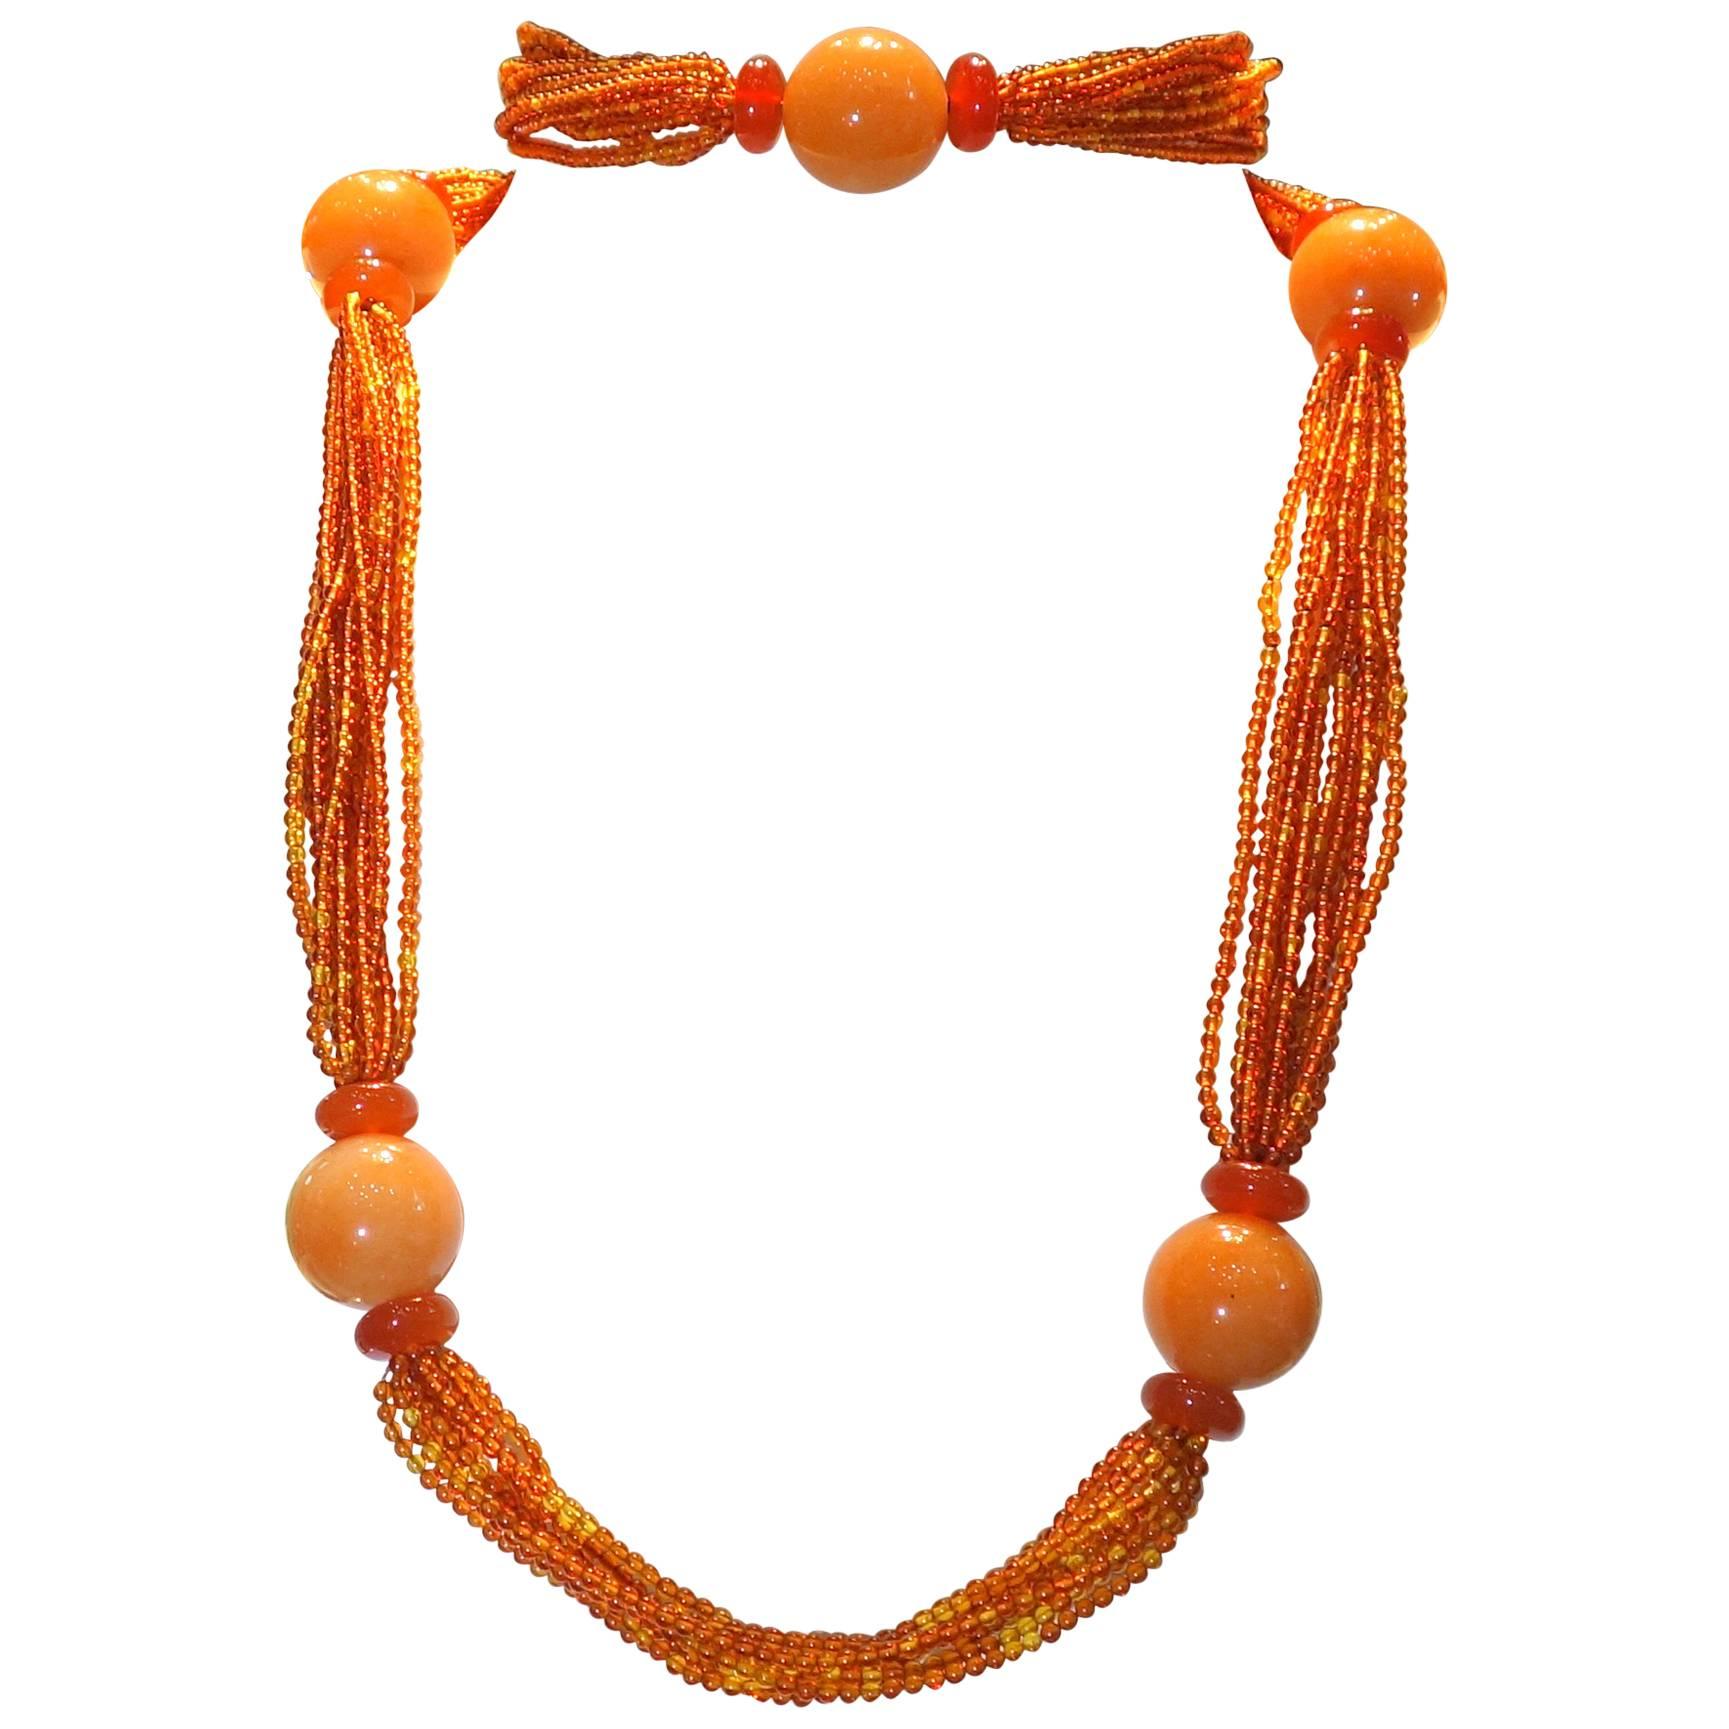 Carnelian and amber necklace